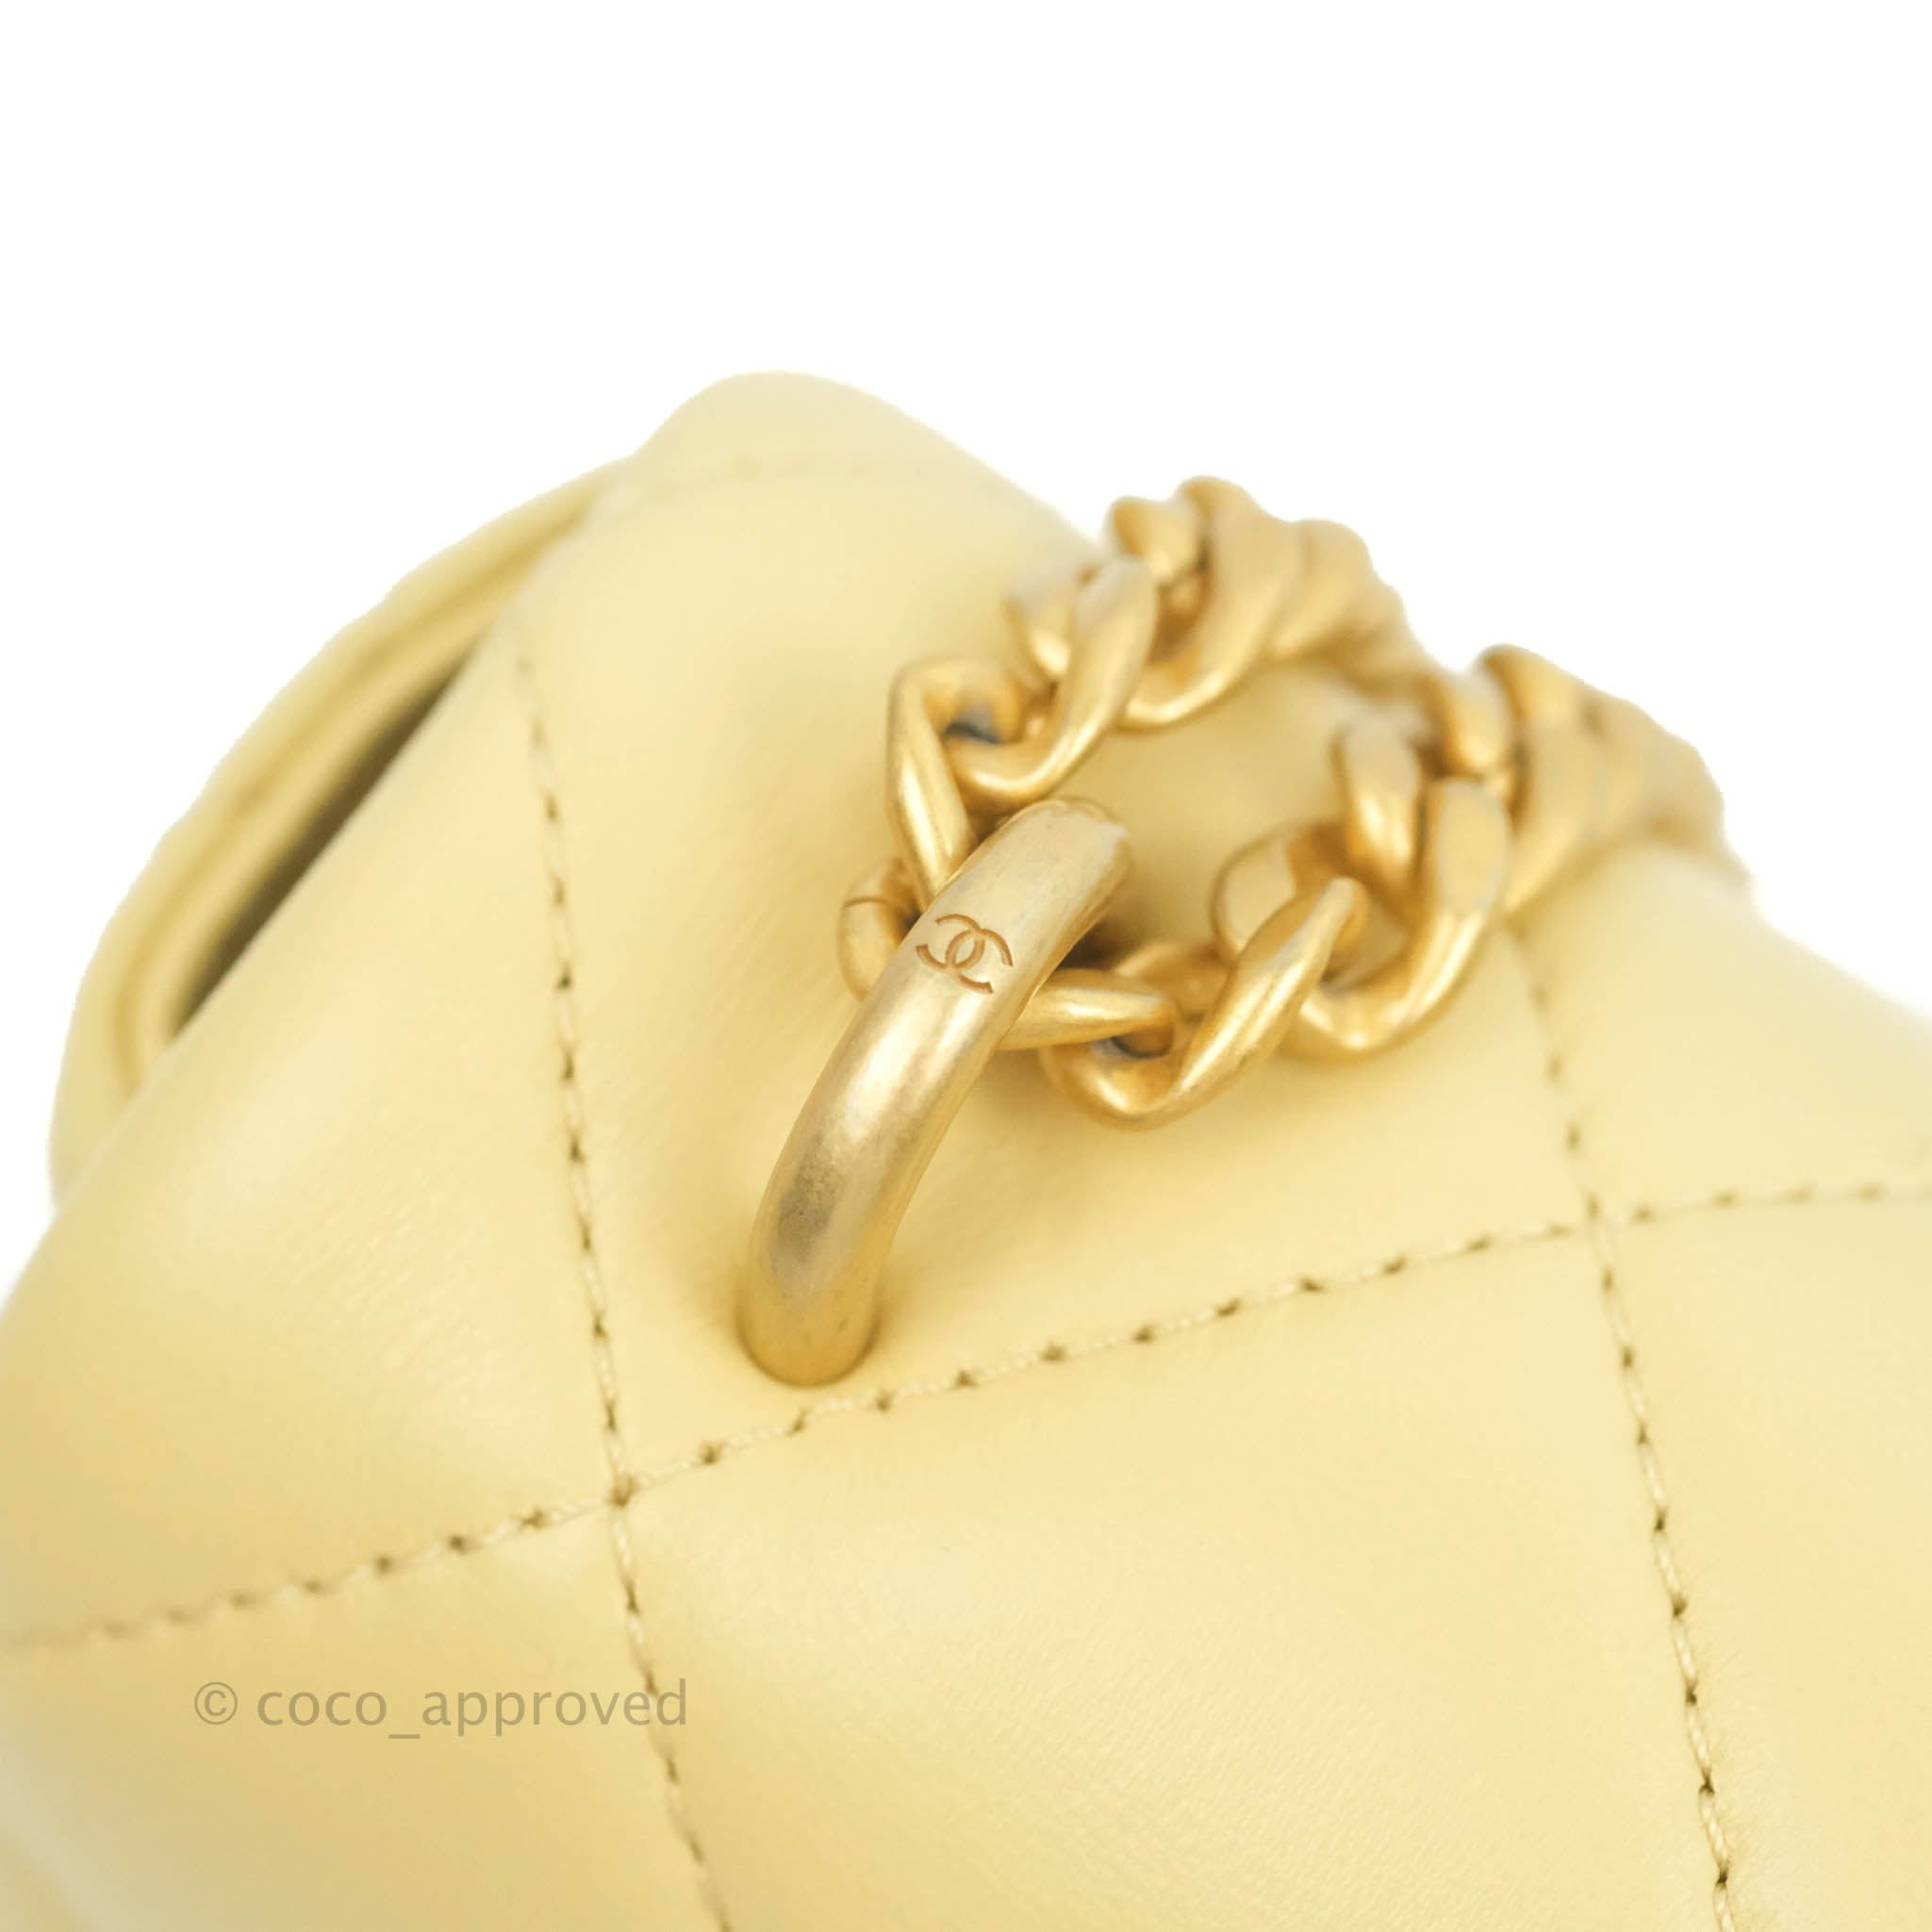 Chanel Candy Chain CC Flap Bag Quilted Lambskin Mini Yellow 1394461